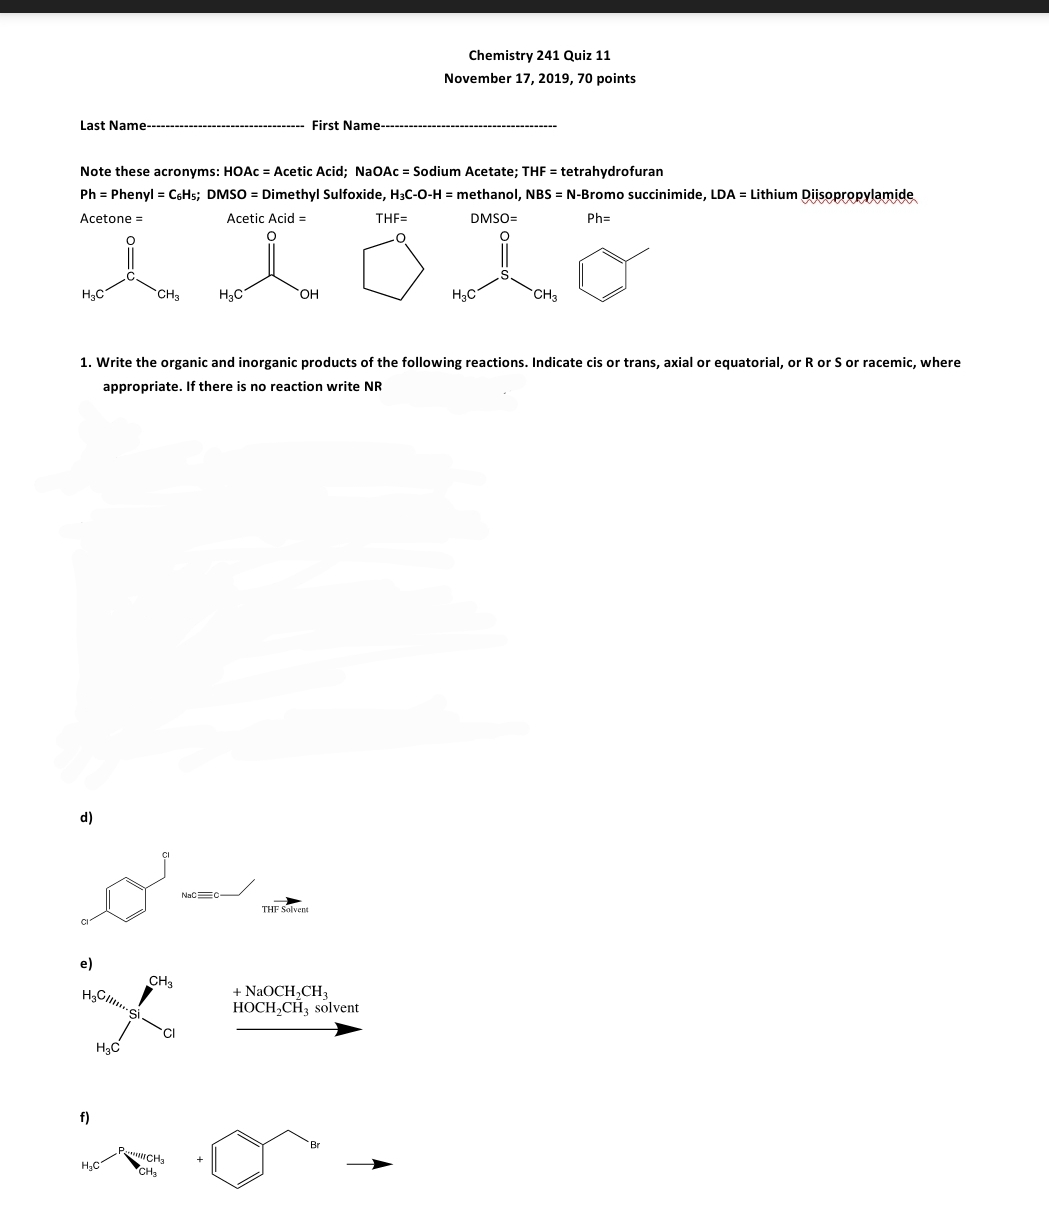 Chemistry 241 Quiz 11
November 17, 2019, 70 points
Last Name---
First Name
Note these acronyms: HOAC = Acetic Acid; NaOAc = Sodium Acetate; THF = tetrahydrofuran
Ph = Phenyl = C6H5; DMSO = Dimethyl Sulfoxide, H3C-0-H = methanol, NBS = N-Bromo succinimide, LDA = Lithium Diisopropylamide
Acetone =
Acetic Acid =
THF=
DMSO=
Ph=
H3C
CH3
H3C
HO,
H3C
CH3
1. Write the organic and inorganic products of the following reactions. Indicate cis or trans, axial or equatorial, or R or S or racemic, where
appropriate. If there is no reaction write NR
d)
NacEC
THF Solvent
e)
CH3
+ NaOCH,CH3
HOCH,CH3 solvent
f)
ICHa
CH3
